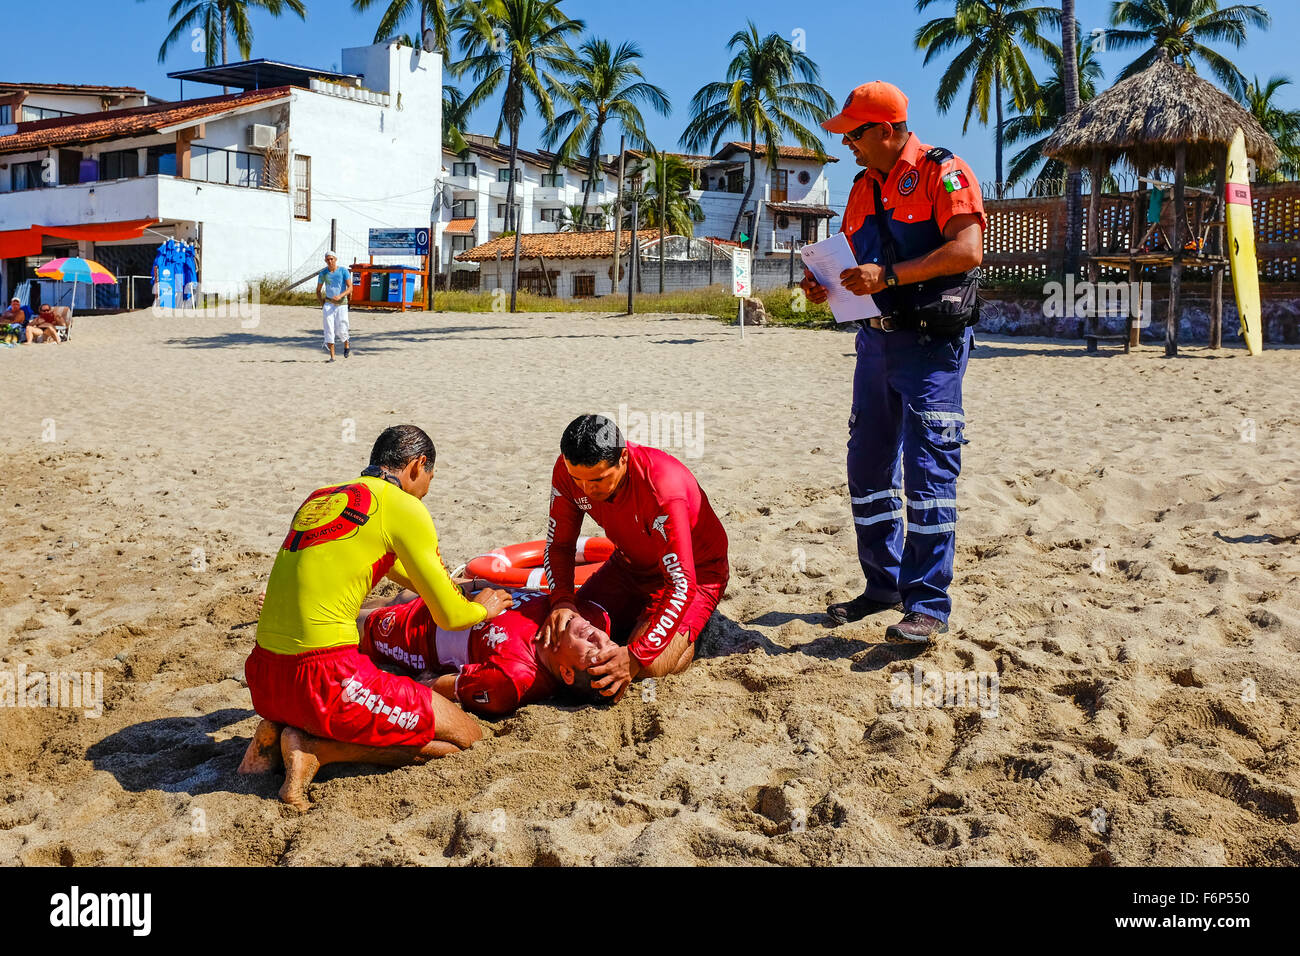 Lifeguards on the beach at Puerto Vallarta, Mexico undergoing training in rescue and lifesaving as part of their licence require Stock Photo